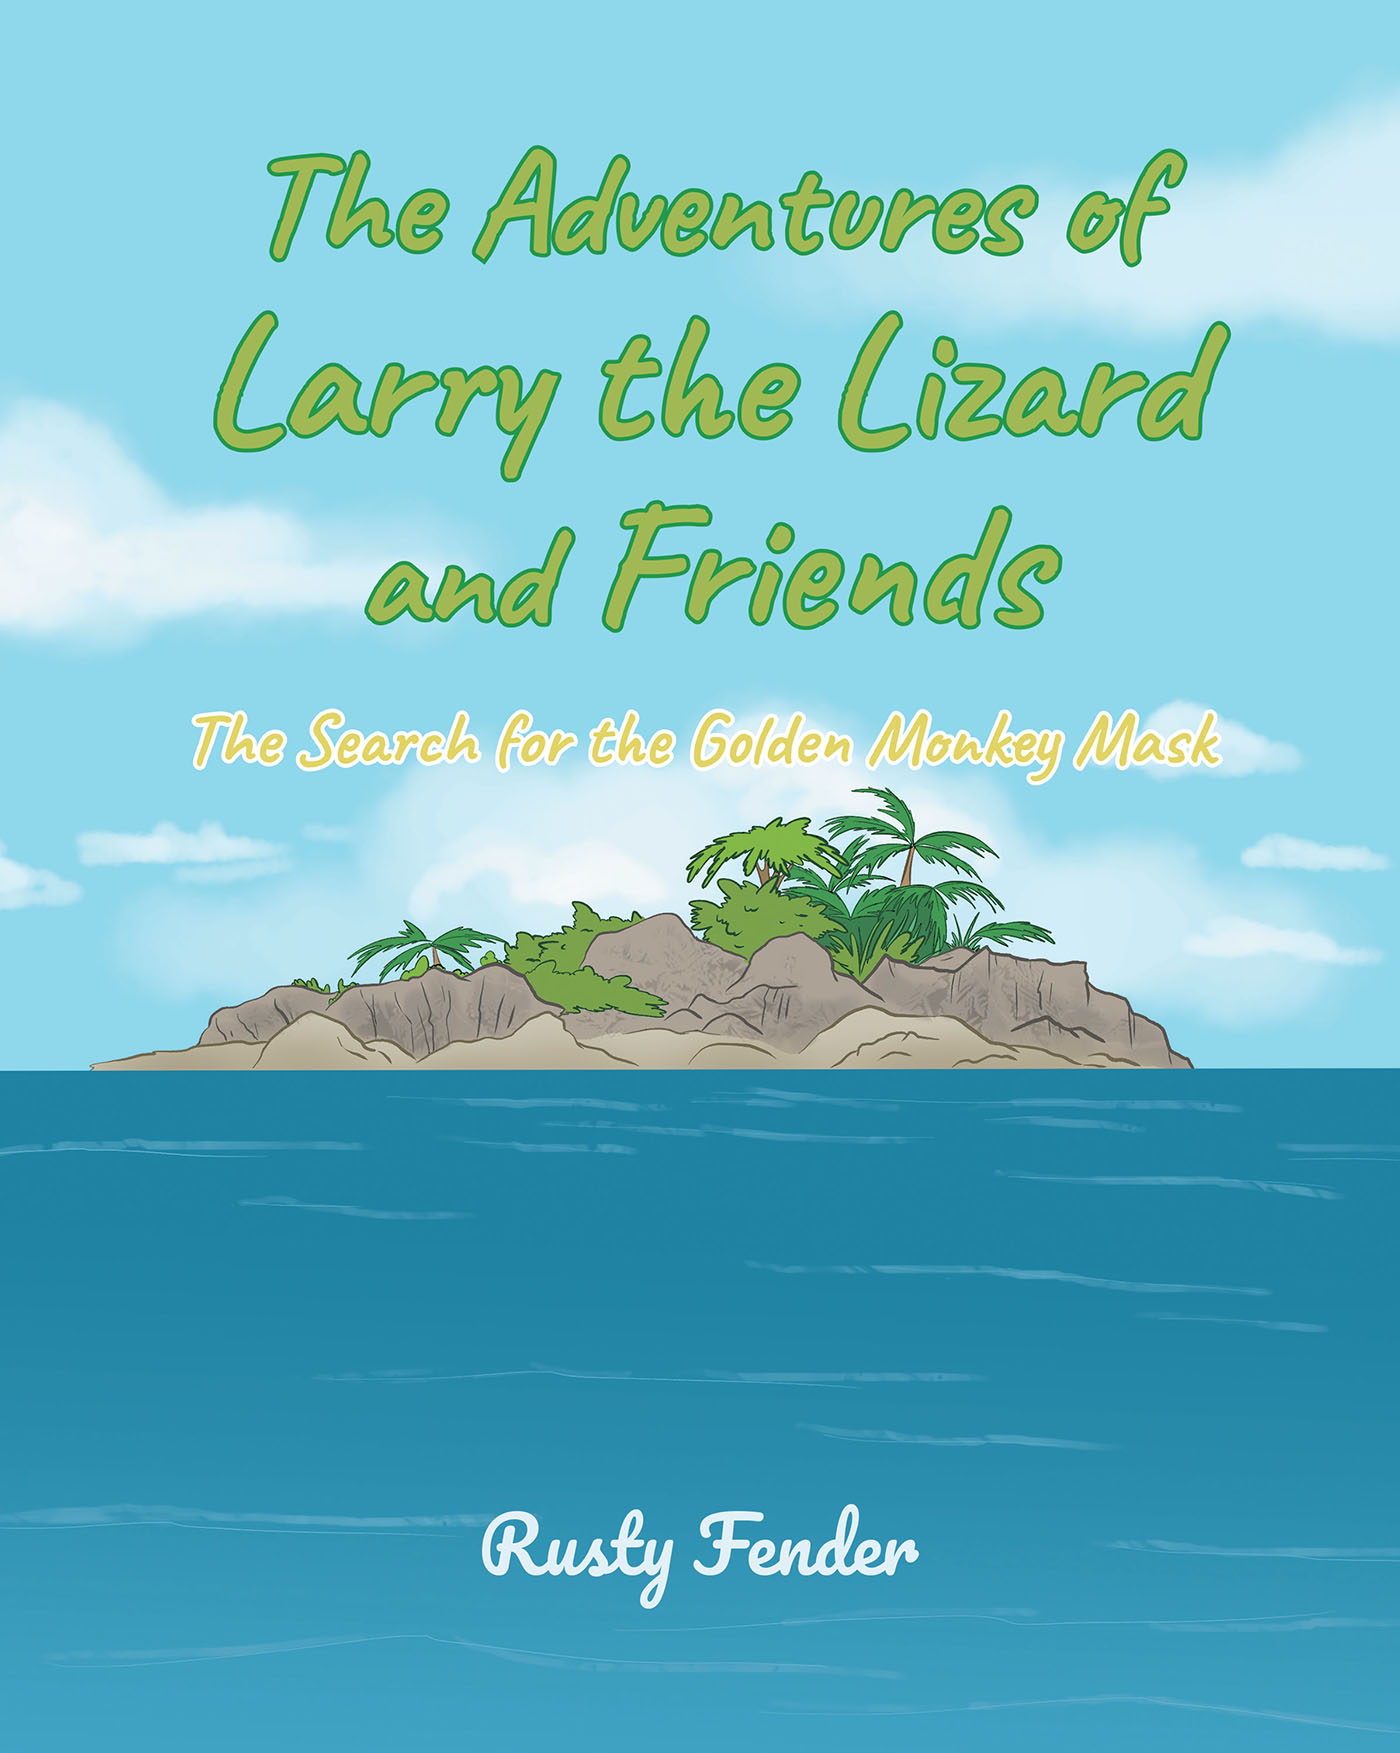 Rusty Fender’s New Book, “The Adventures of Larry the Lizard and Friends: The Search for the Golden Monkey Mask,” Follows Three Friends on Their Epic Quest for Treasure